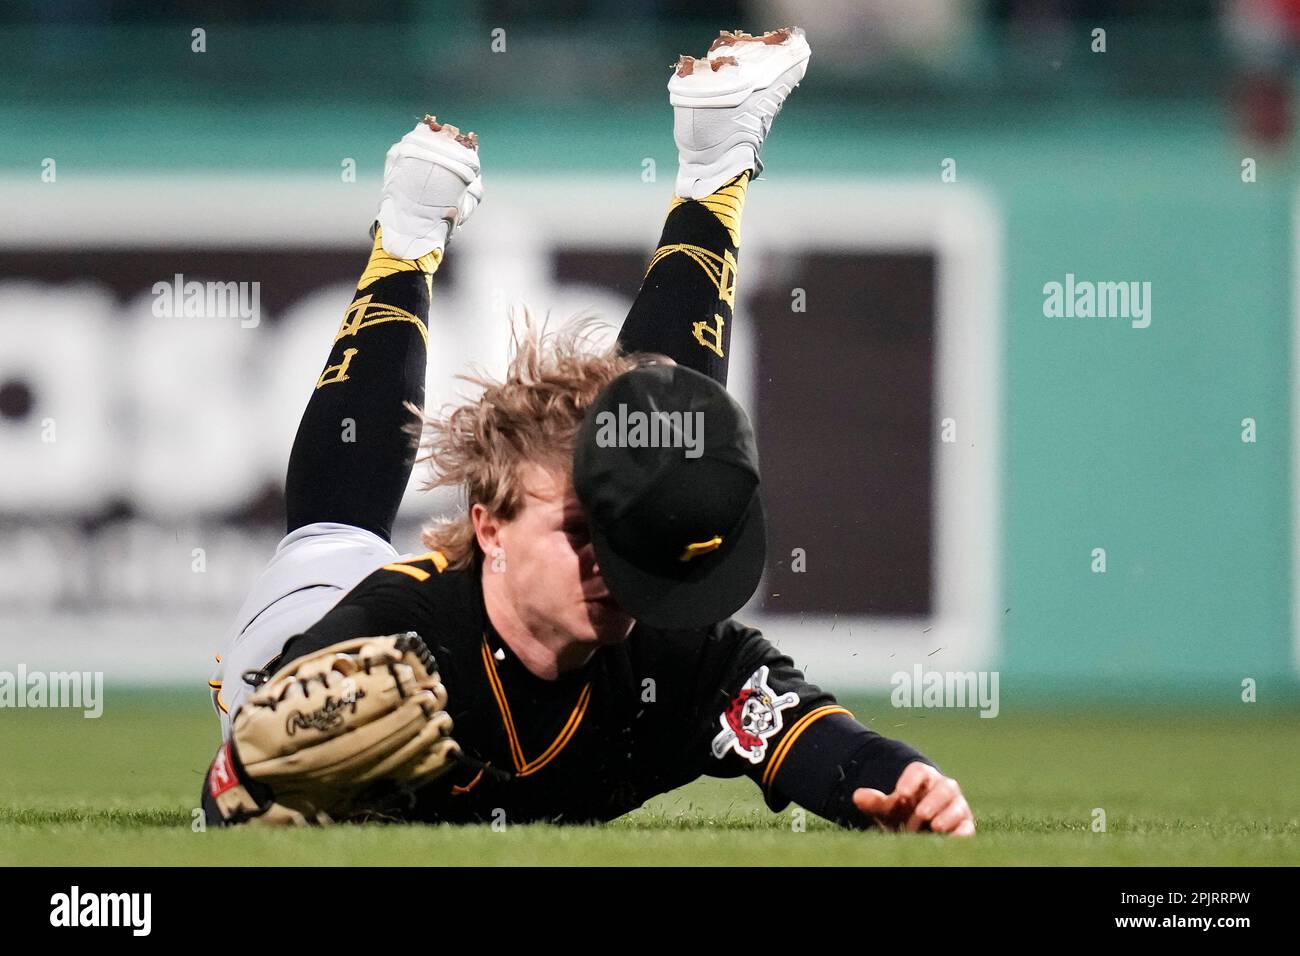 Pittsburgh Pirates right fielder Jack Suwinski loses his cap while making  the catch on a fly out by Boston Red Sox's Enrique Hernandez during the  fourth inning of a baseball game at